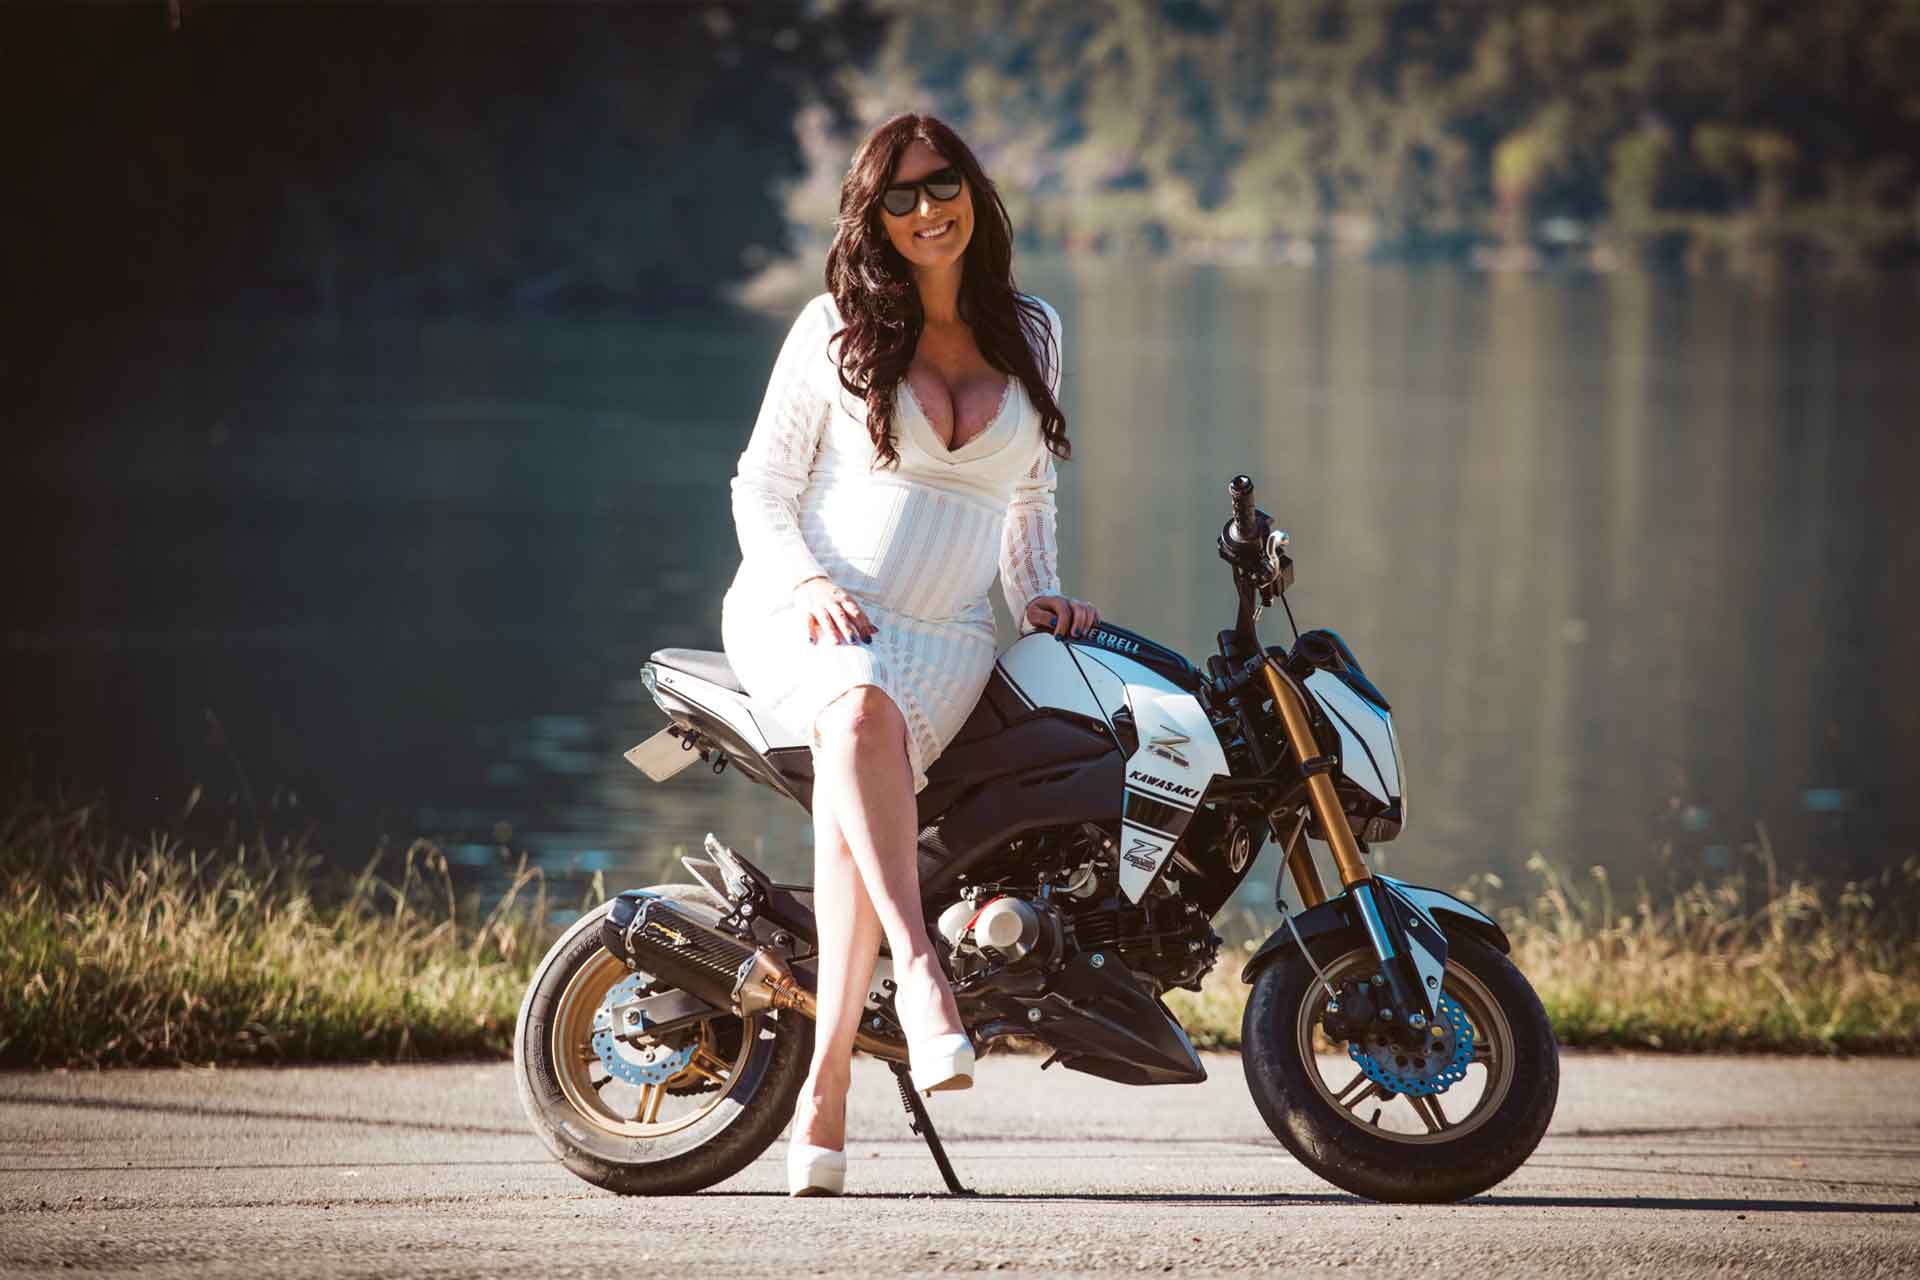 Can a Pregnant Woman Ride on a Motorcycle? Find Out the Safe Way!